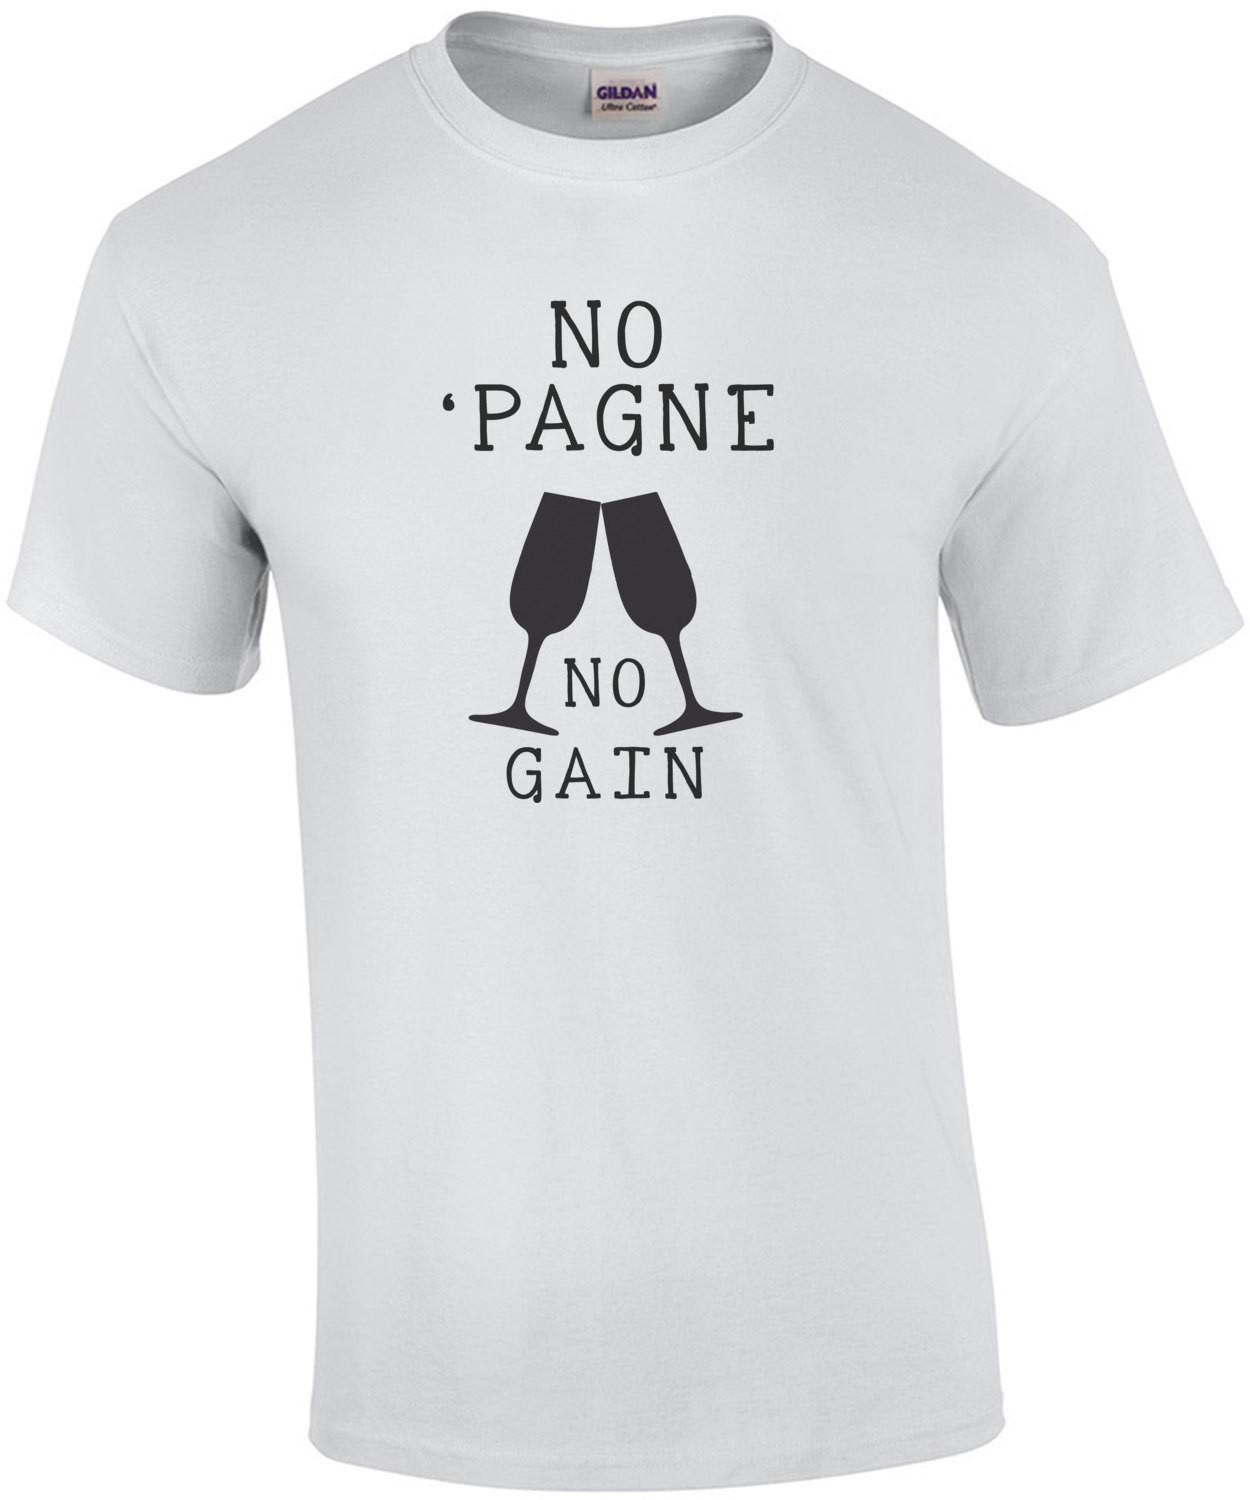 No 'Pagne No Gain - Funny Champagne Drinking